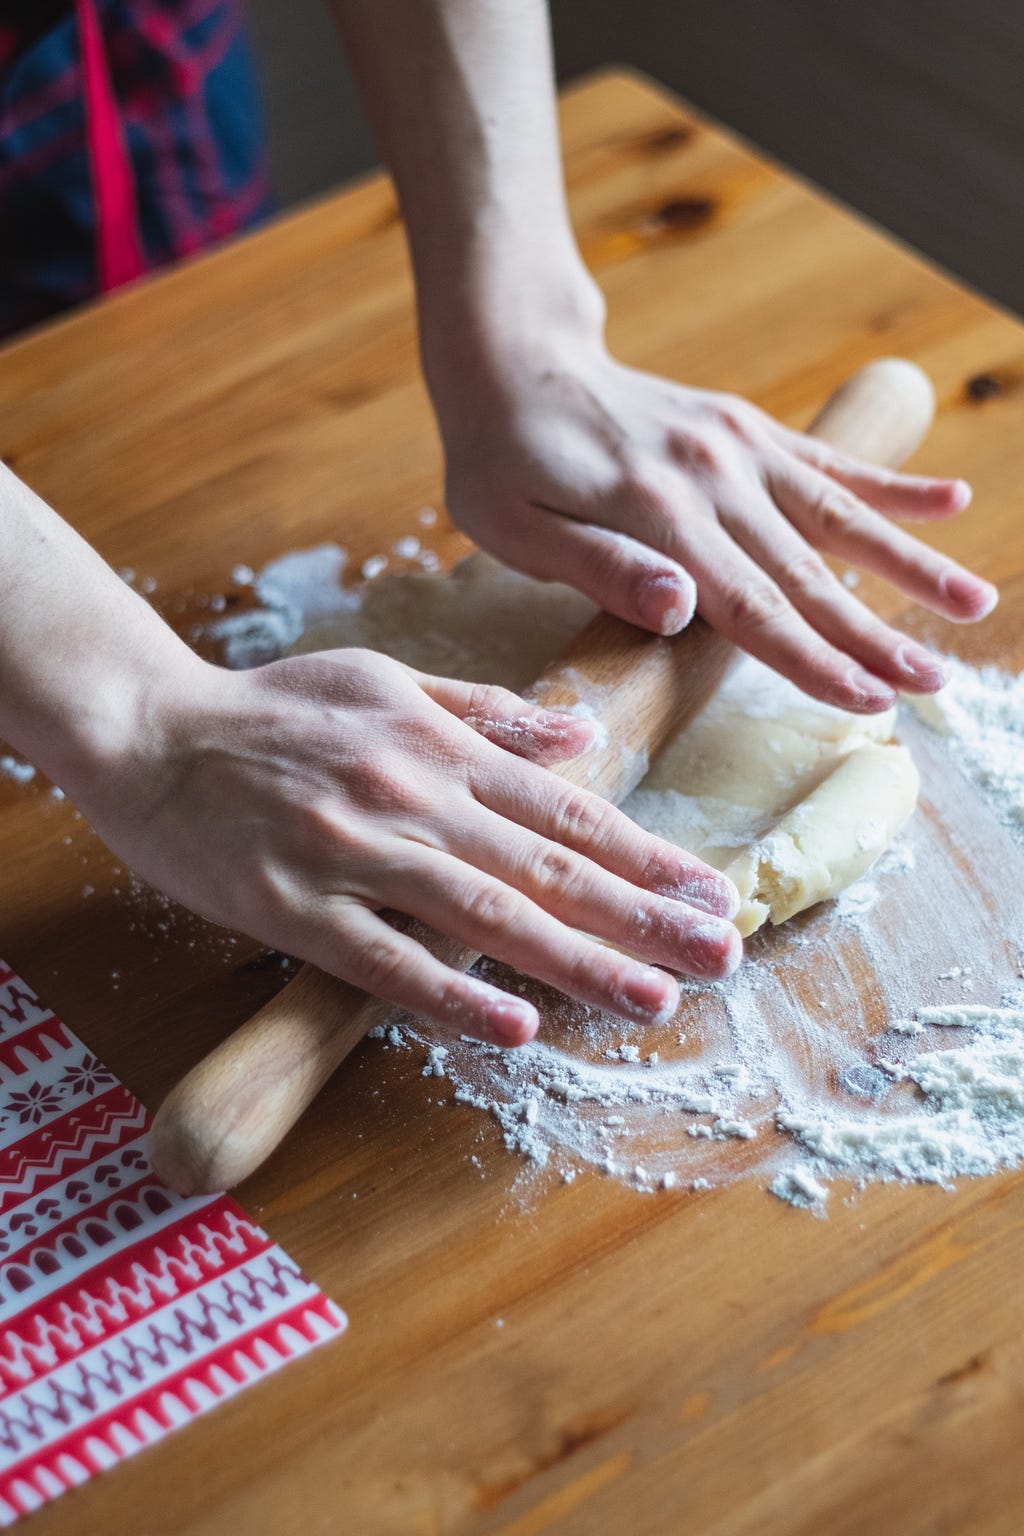 Two hands rolling out dough with a wooden rolling pin on a wooden table covered in flour.